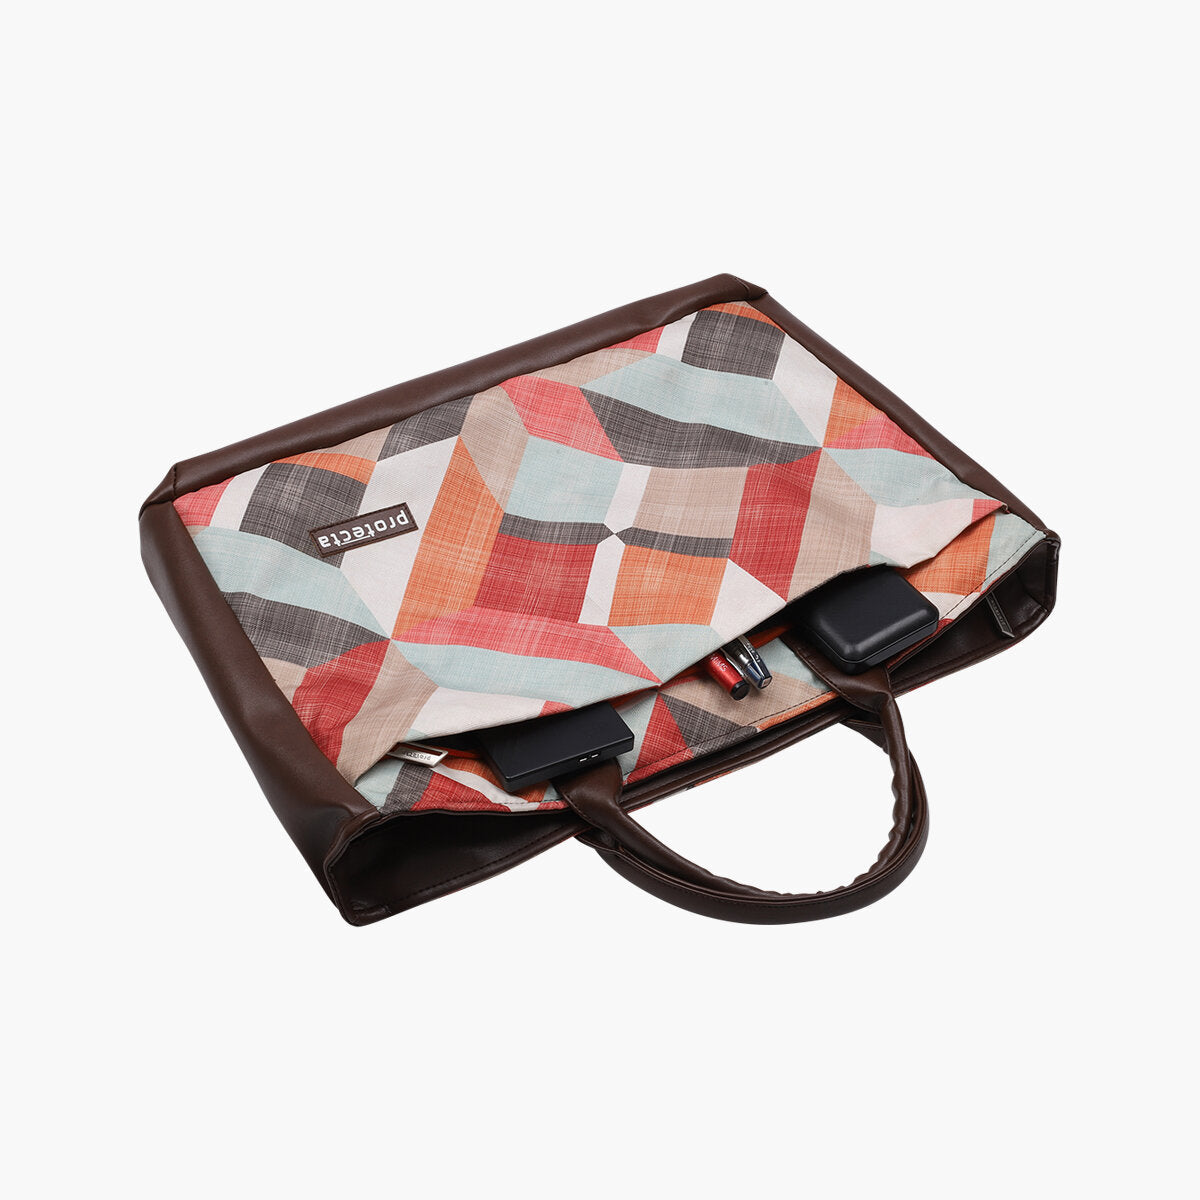 Geometric Print | Protecta Evenly Poised Office Laptop Bag for Women - 6